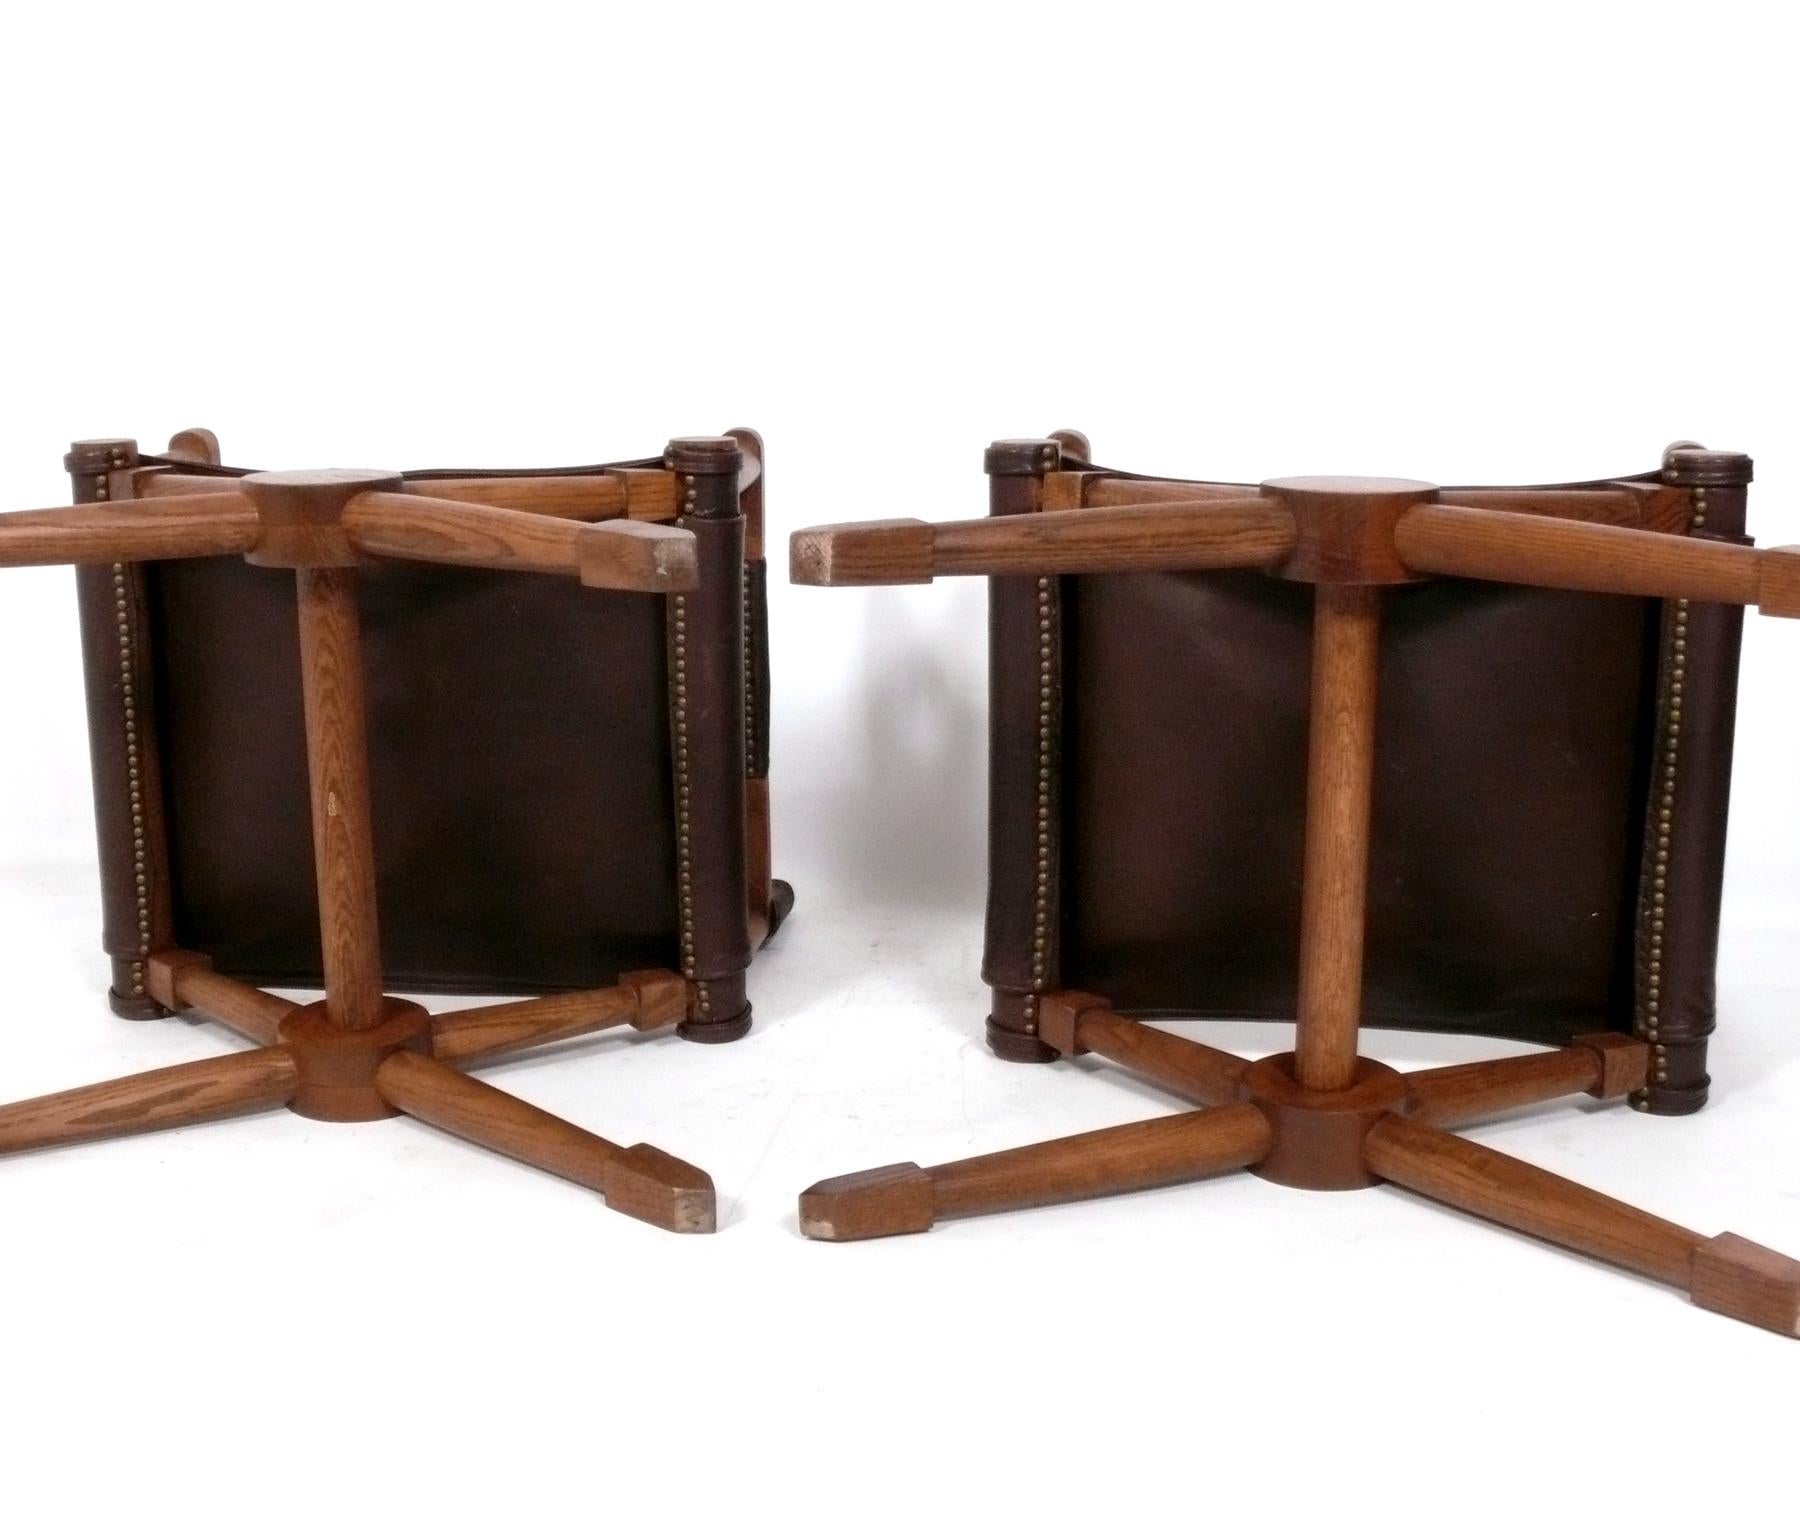 Mid-20th Century Pair of Rodo Chairs by Paul Rodocanachi for Jean Michel Frank